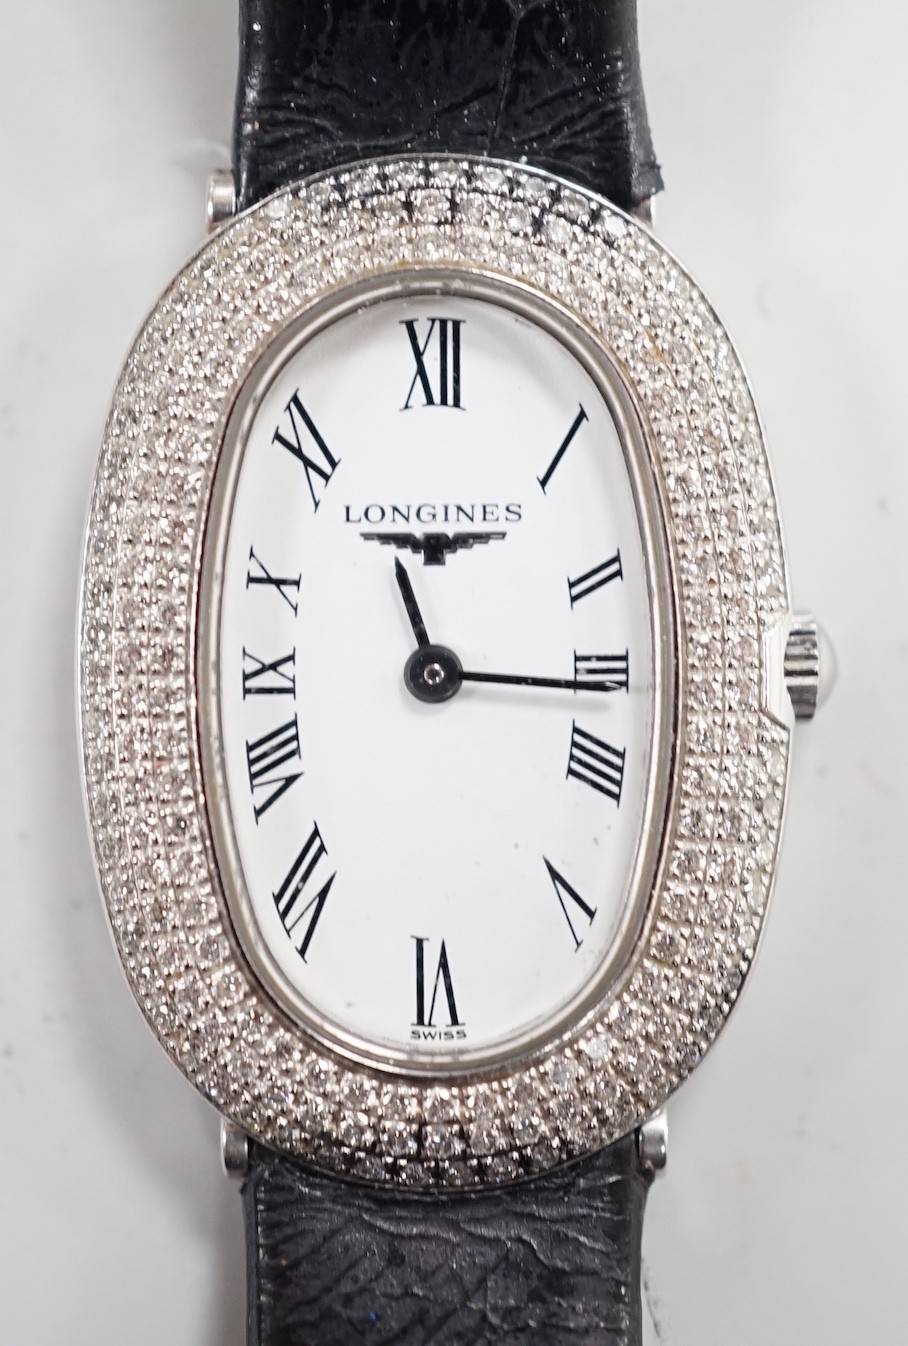 A lady's 2010 18ct white gold and diamond set Longines oval quartz wrist watch, with Roman dial, case back numbered 32157237, on Longines leather strap, with stainless steel buckle, case diameter 21mm, the total diamond